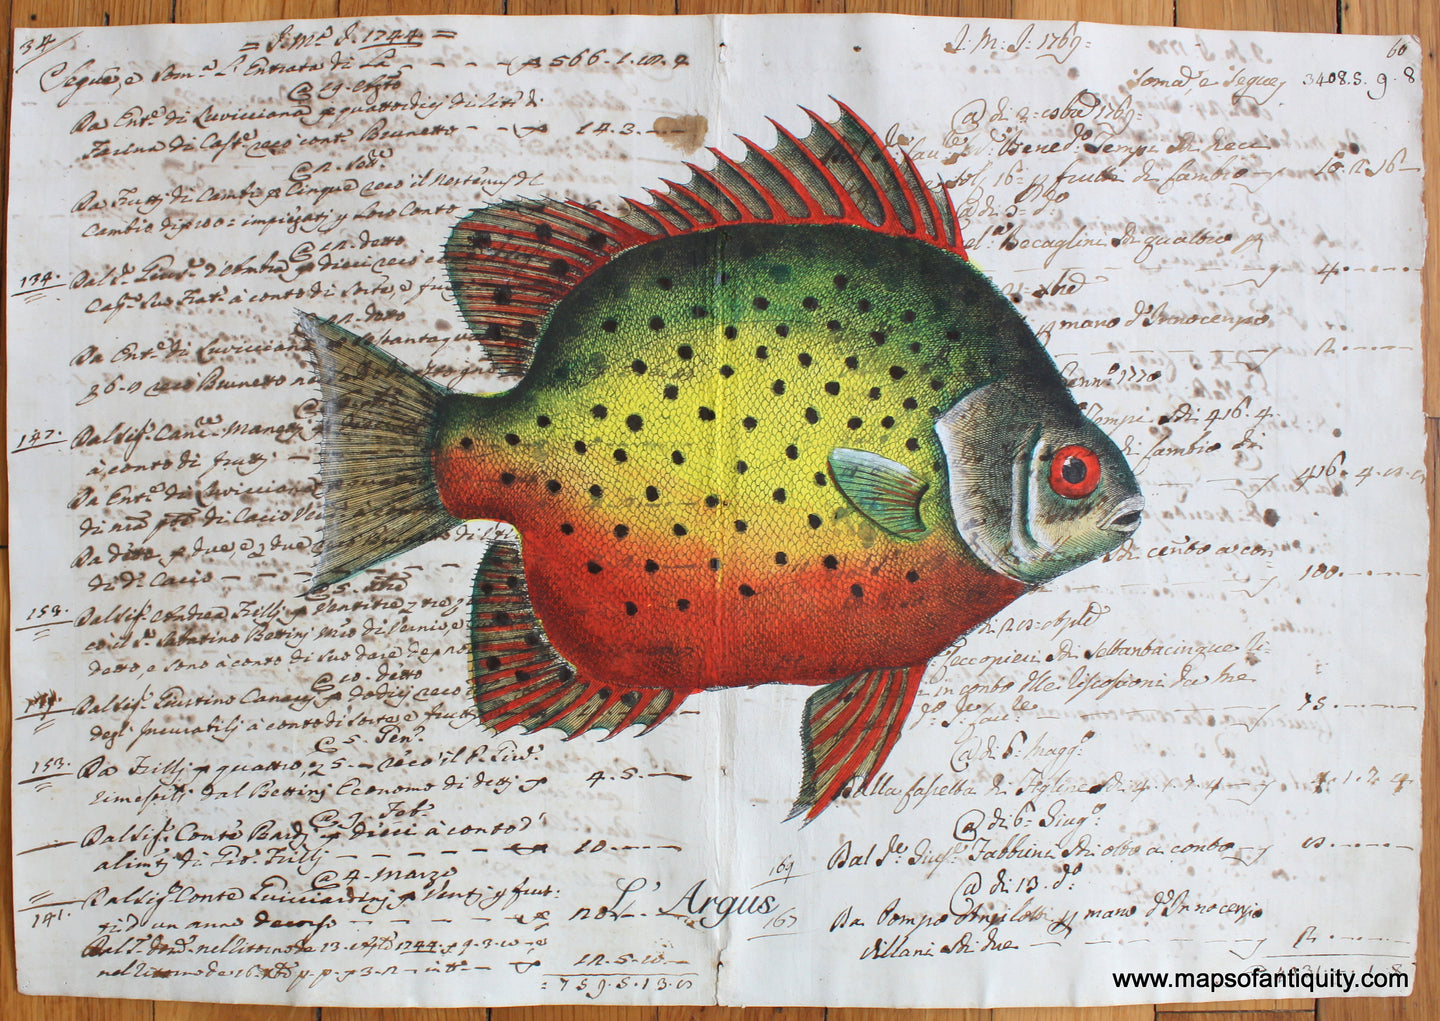 Digitally-Engraved-Specialty-Reproductions-Print-Prints-Antique-Ledger-Paper-L'Argus-Spotted-Scat-Fish-Fishing-Maps-of-Antiquity